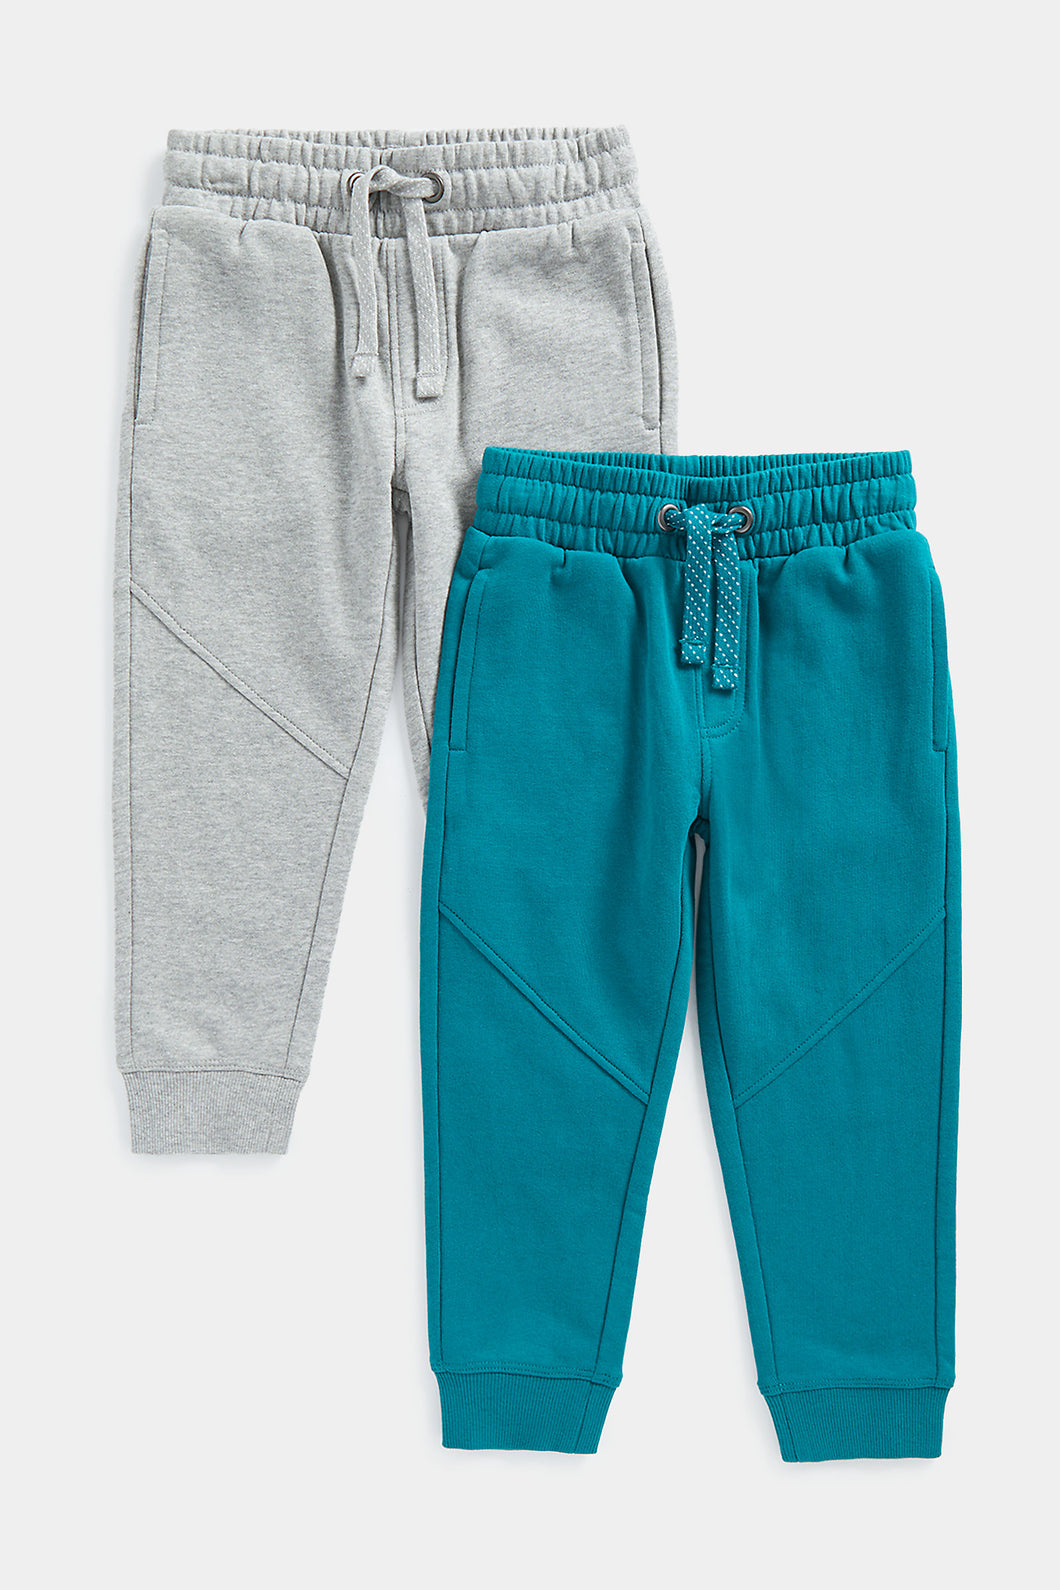 Mothercare Grey and Teal Joggers - 2 Pack